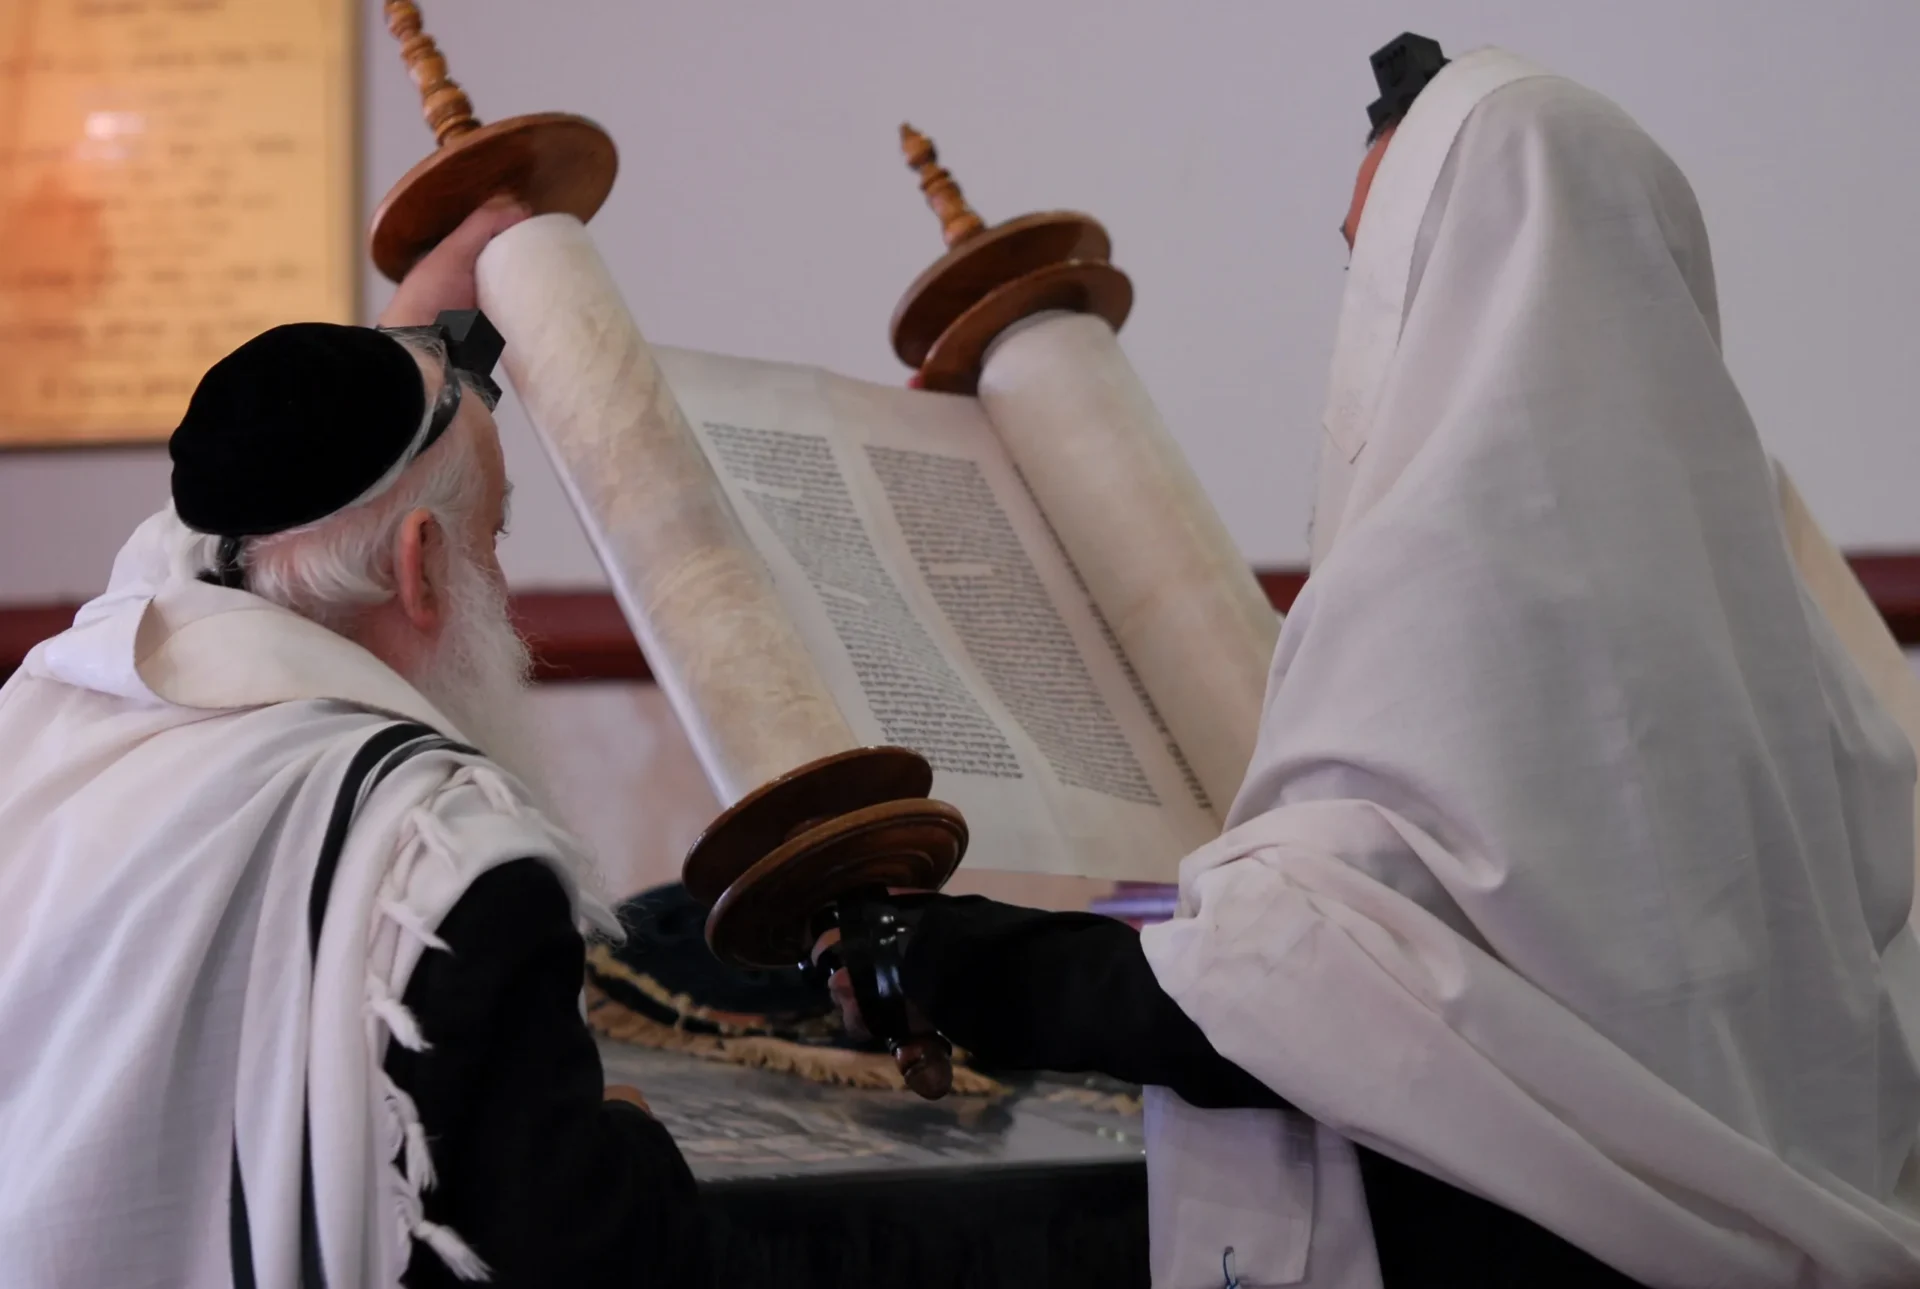 Two men reading a torah scroll in front of a table.